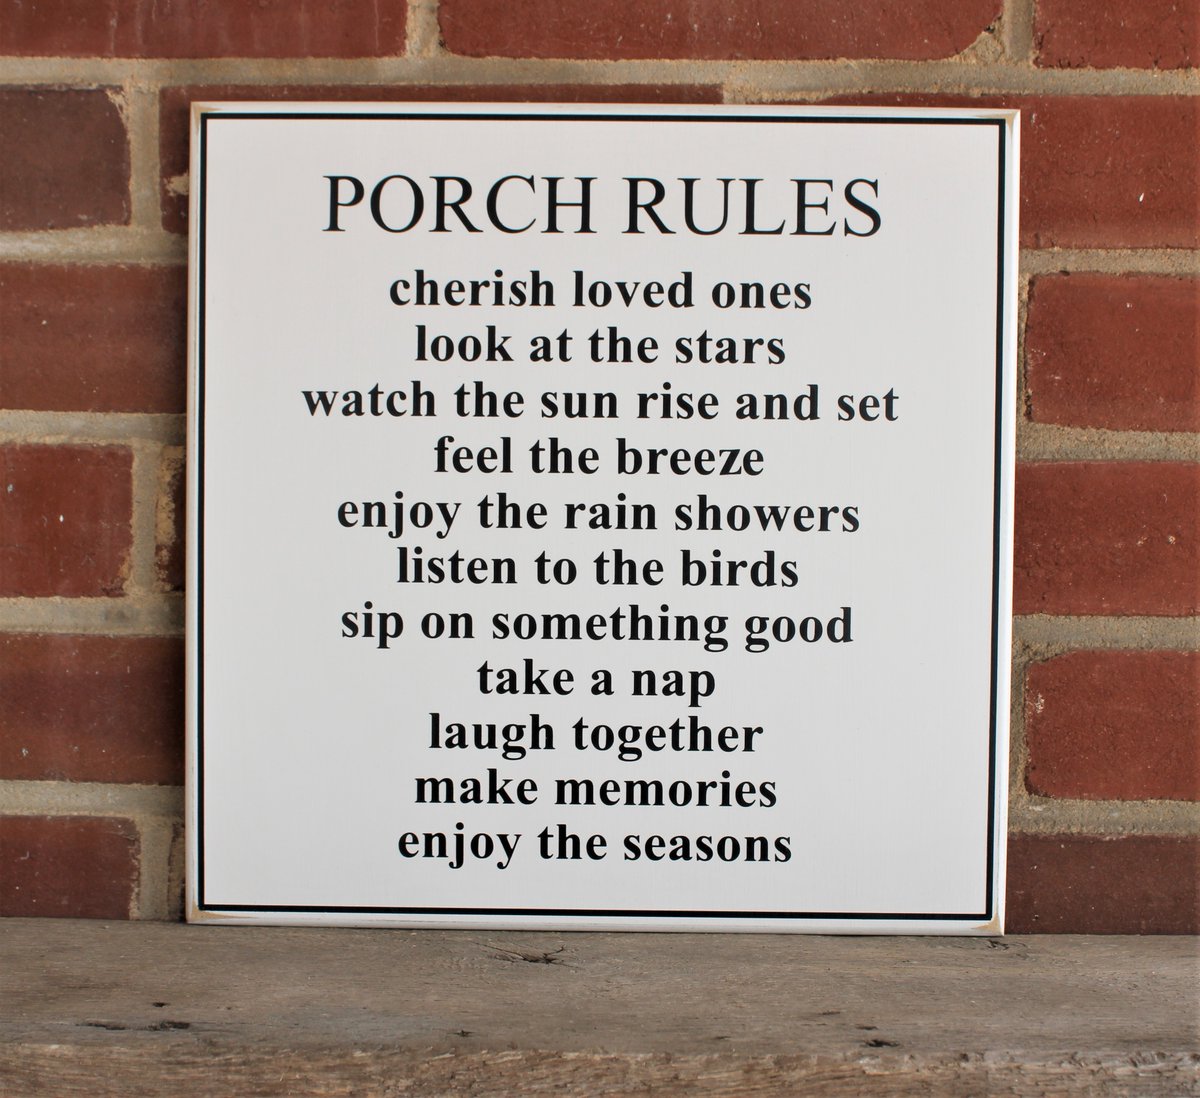 #PorchRules Wood Sign #WelcomeHome to the Summer Porch #HousewarmingGift Wall Art Worn Finish Porch Decor #OutdoorLiving #smilett23 etsy.me/4bw3DpI via @Etsy